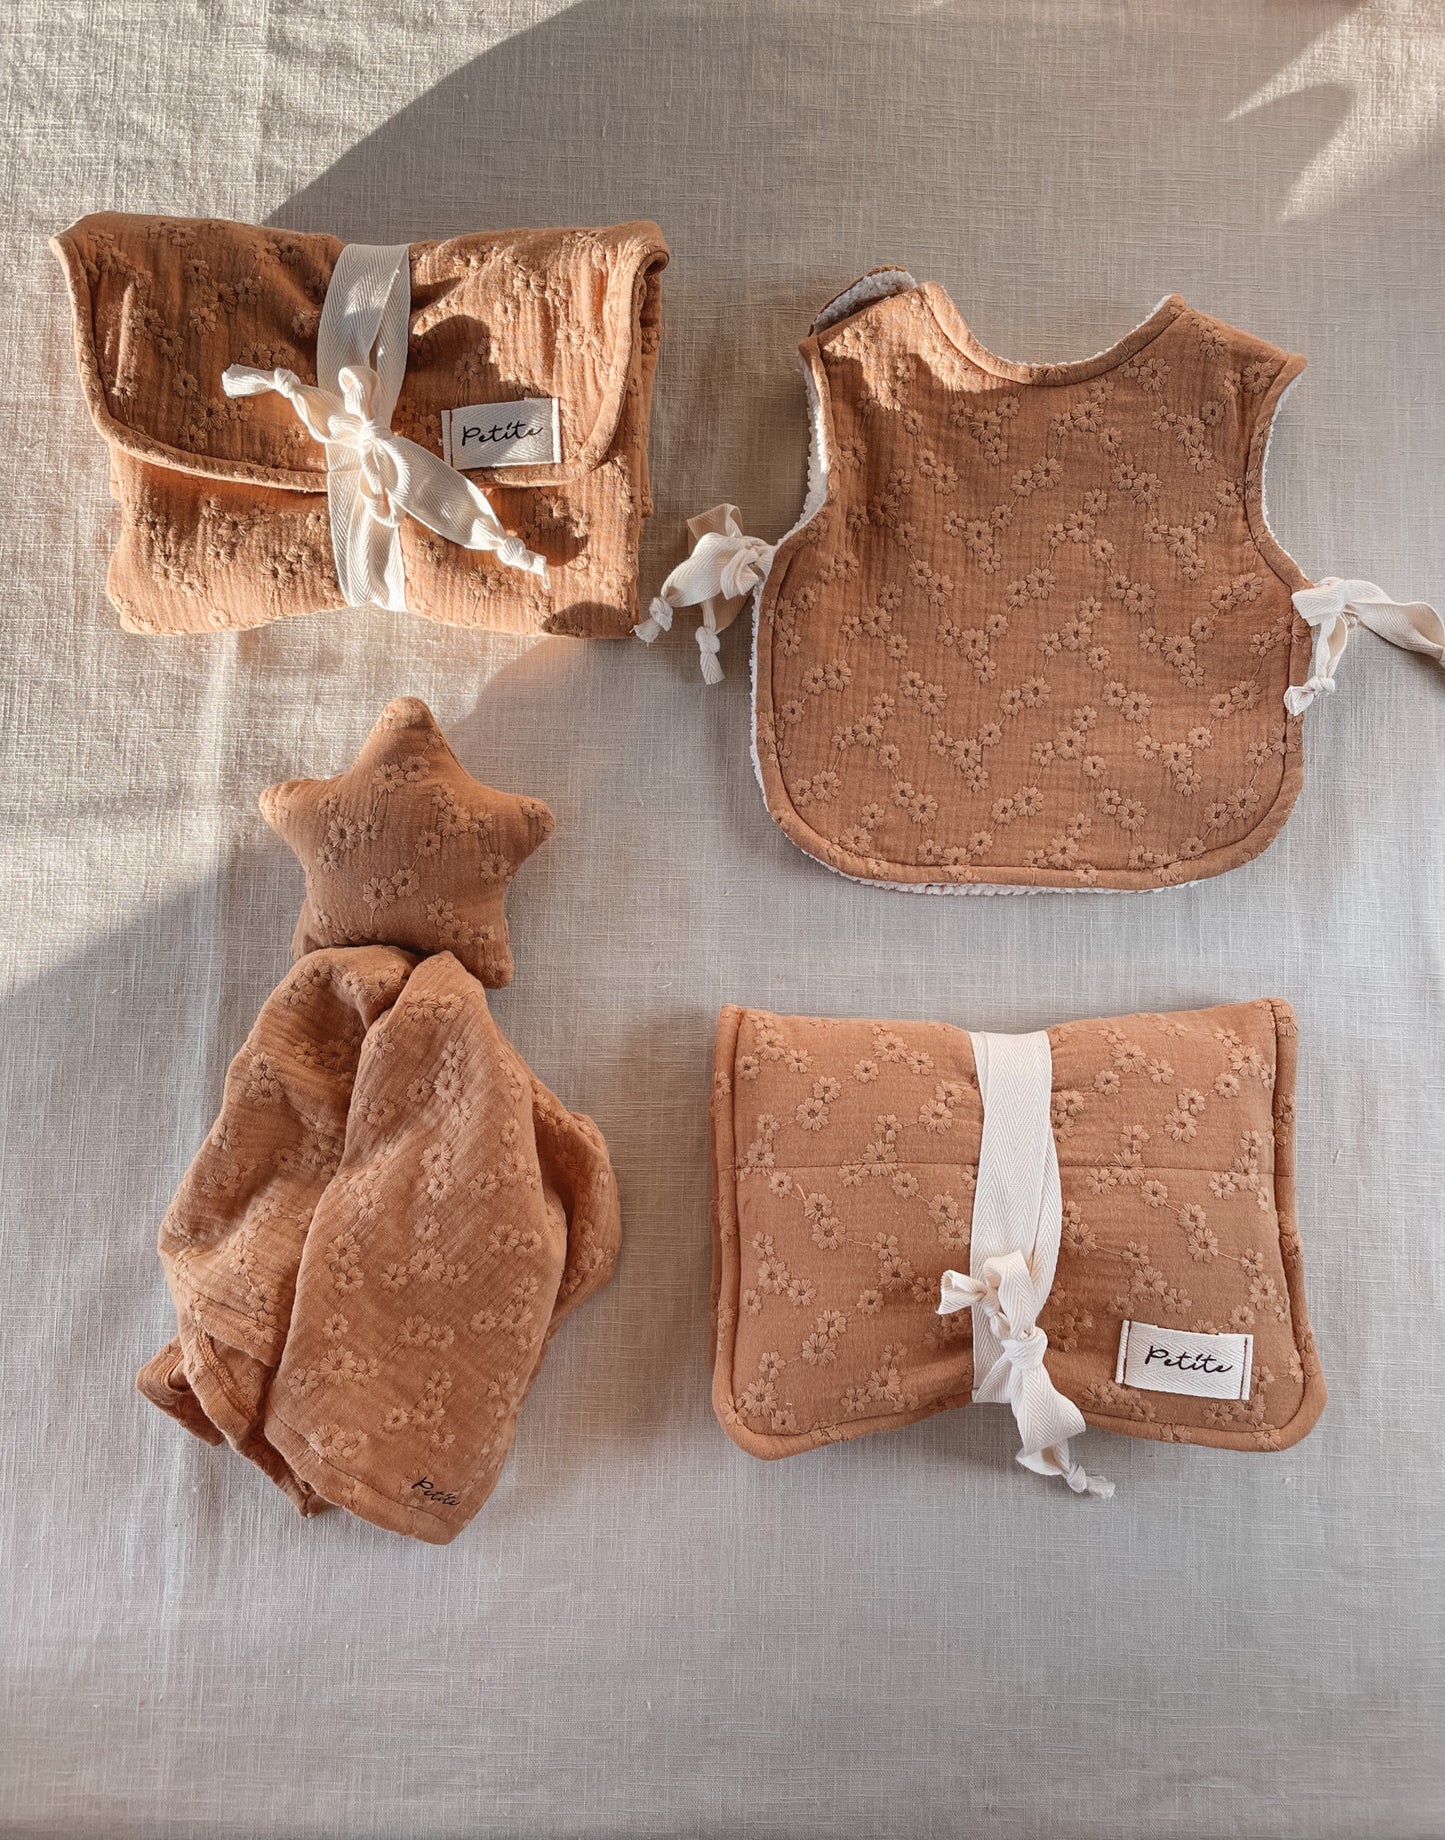 Little star cuddle cloth / embroidered caramel